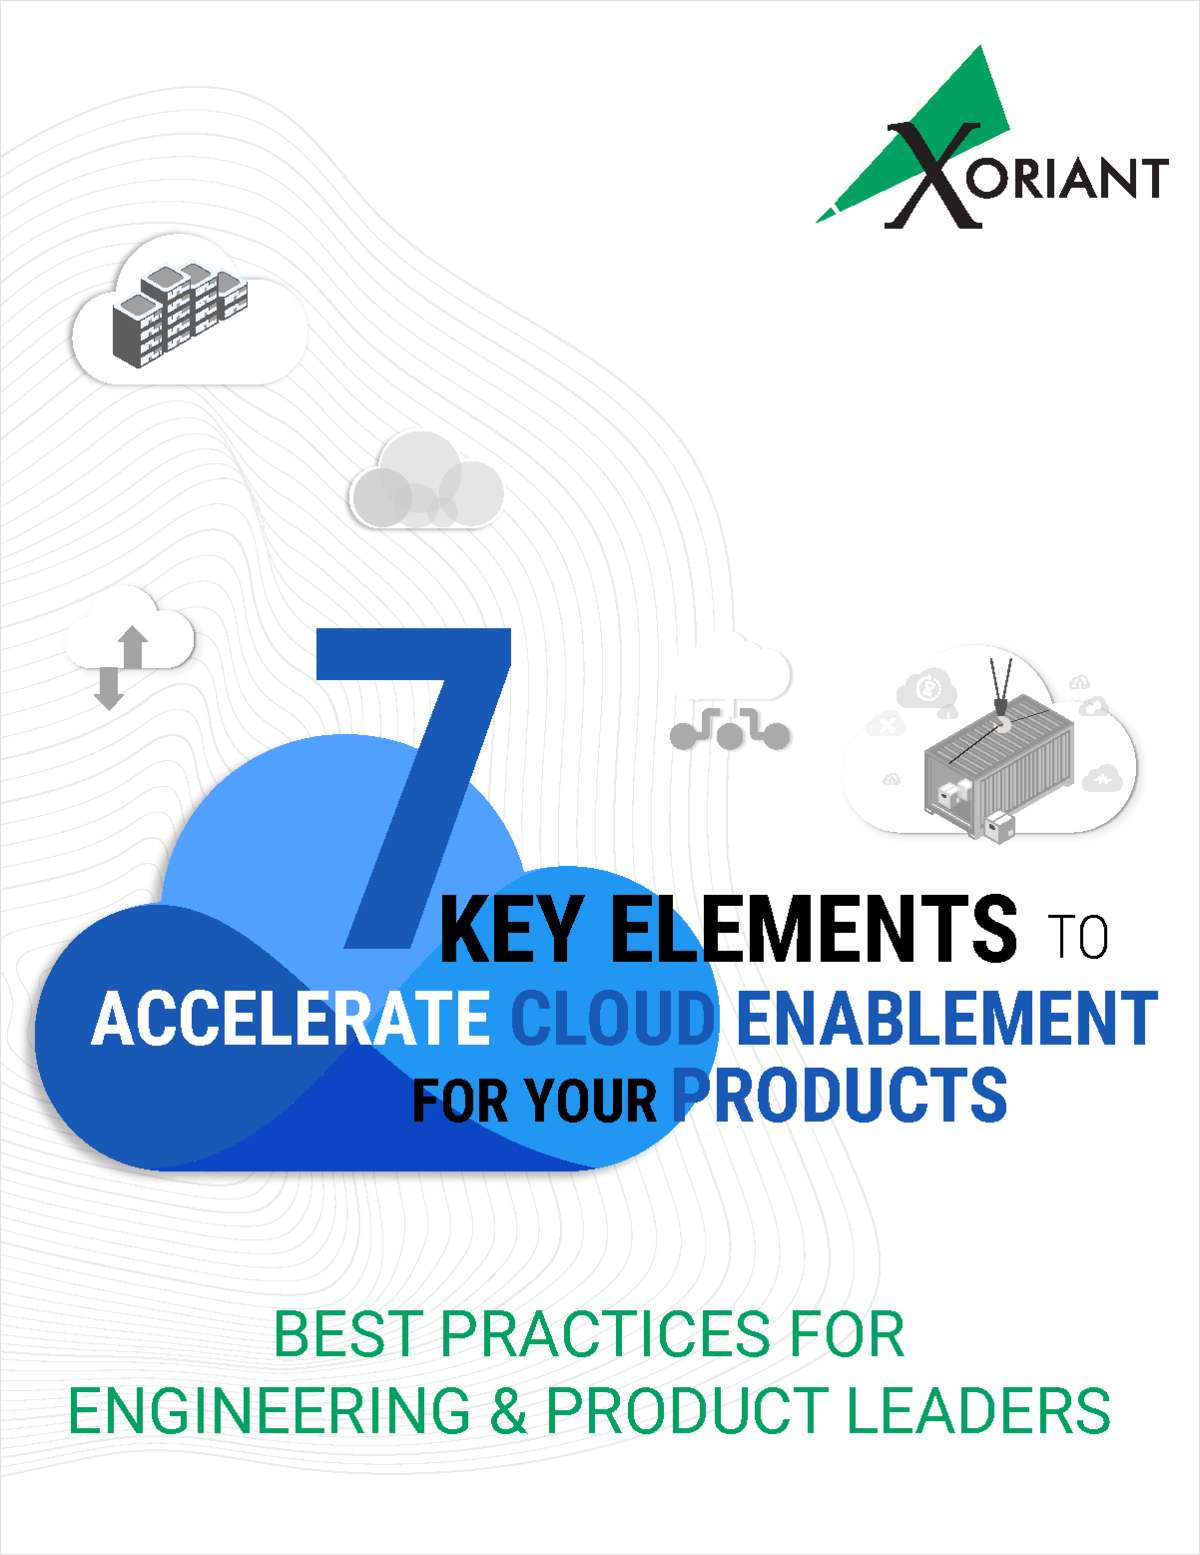 7 Key Elements To Accelerate Cloud Enablement For Your Products